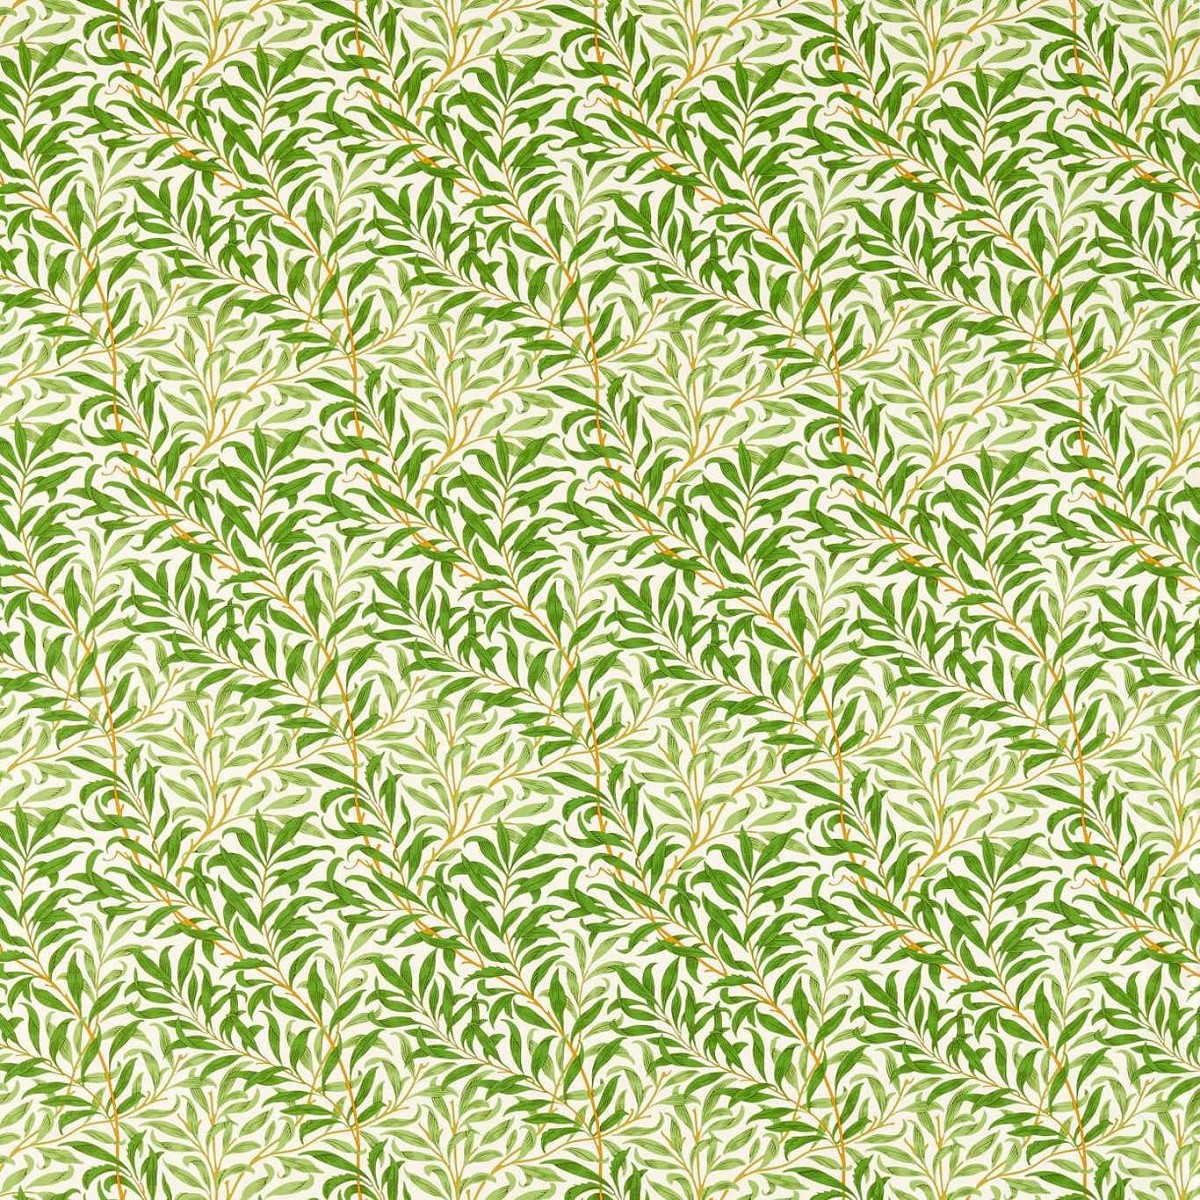 Willow Bough Leaf Green Fabric by William Morris & Co.